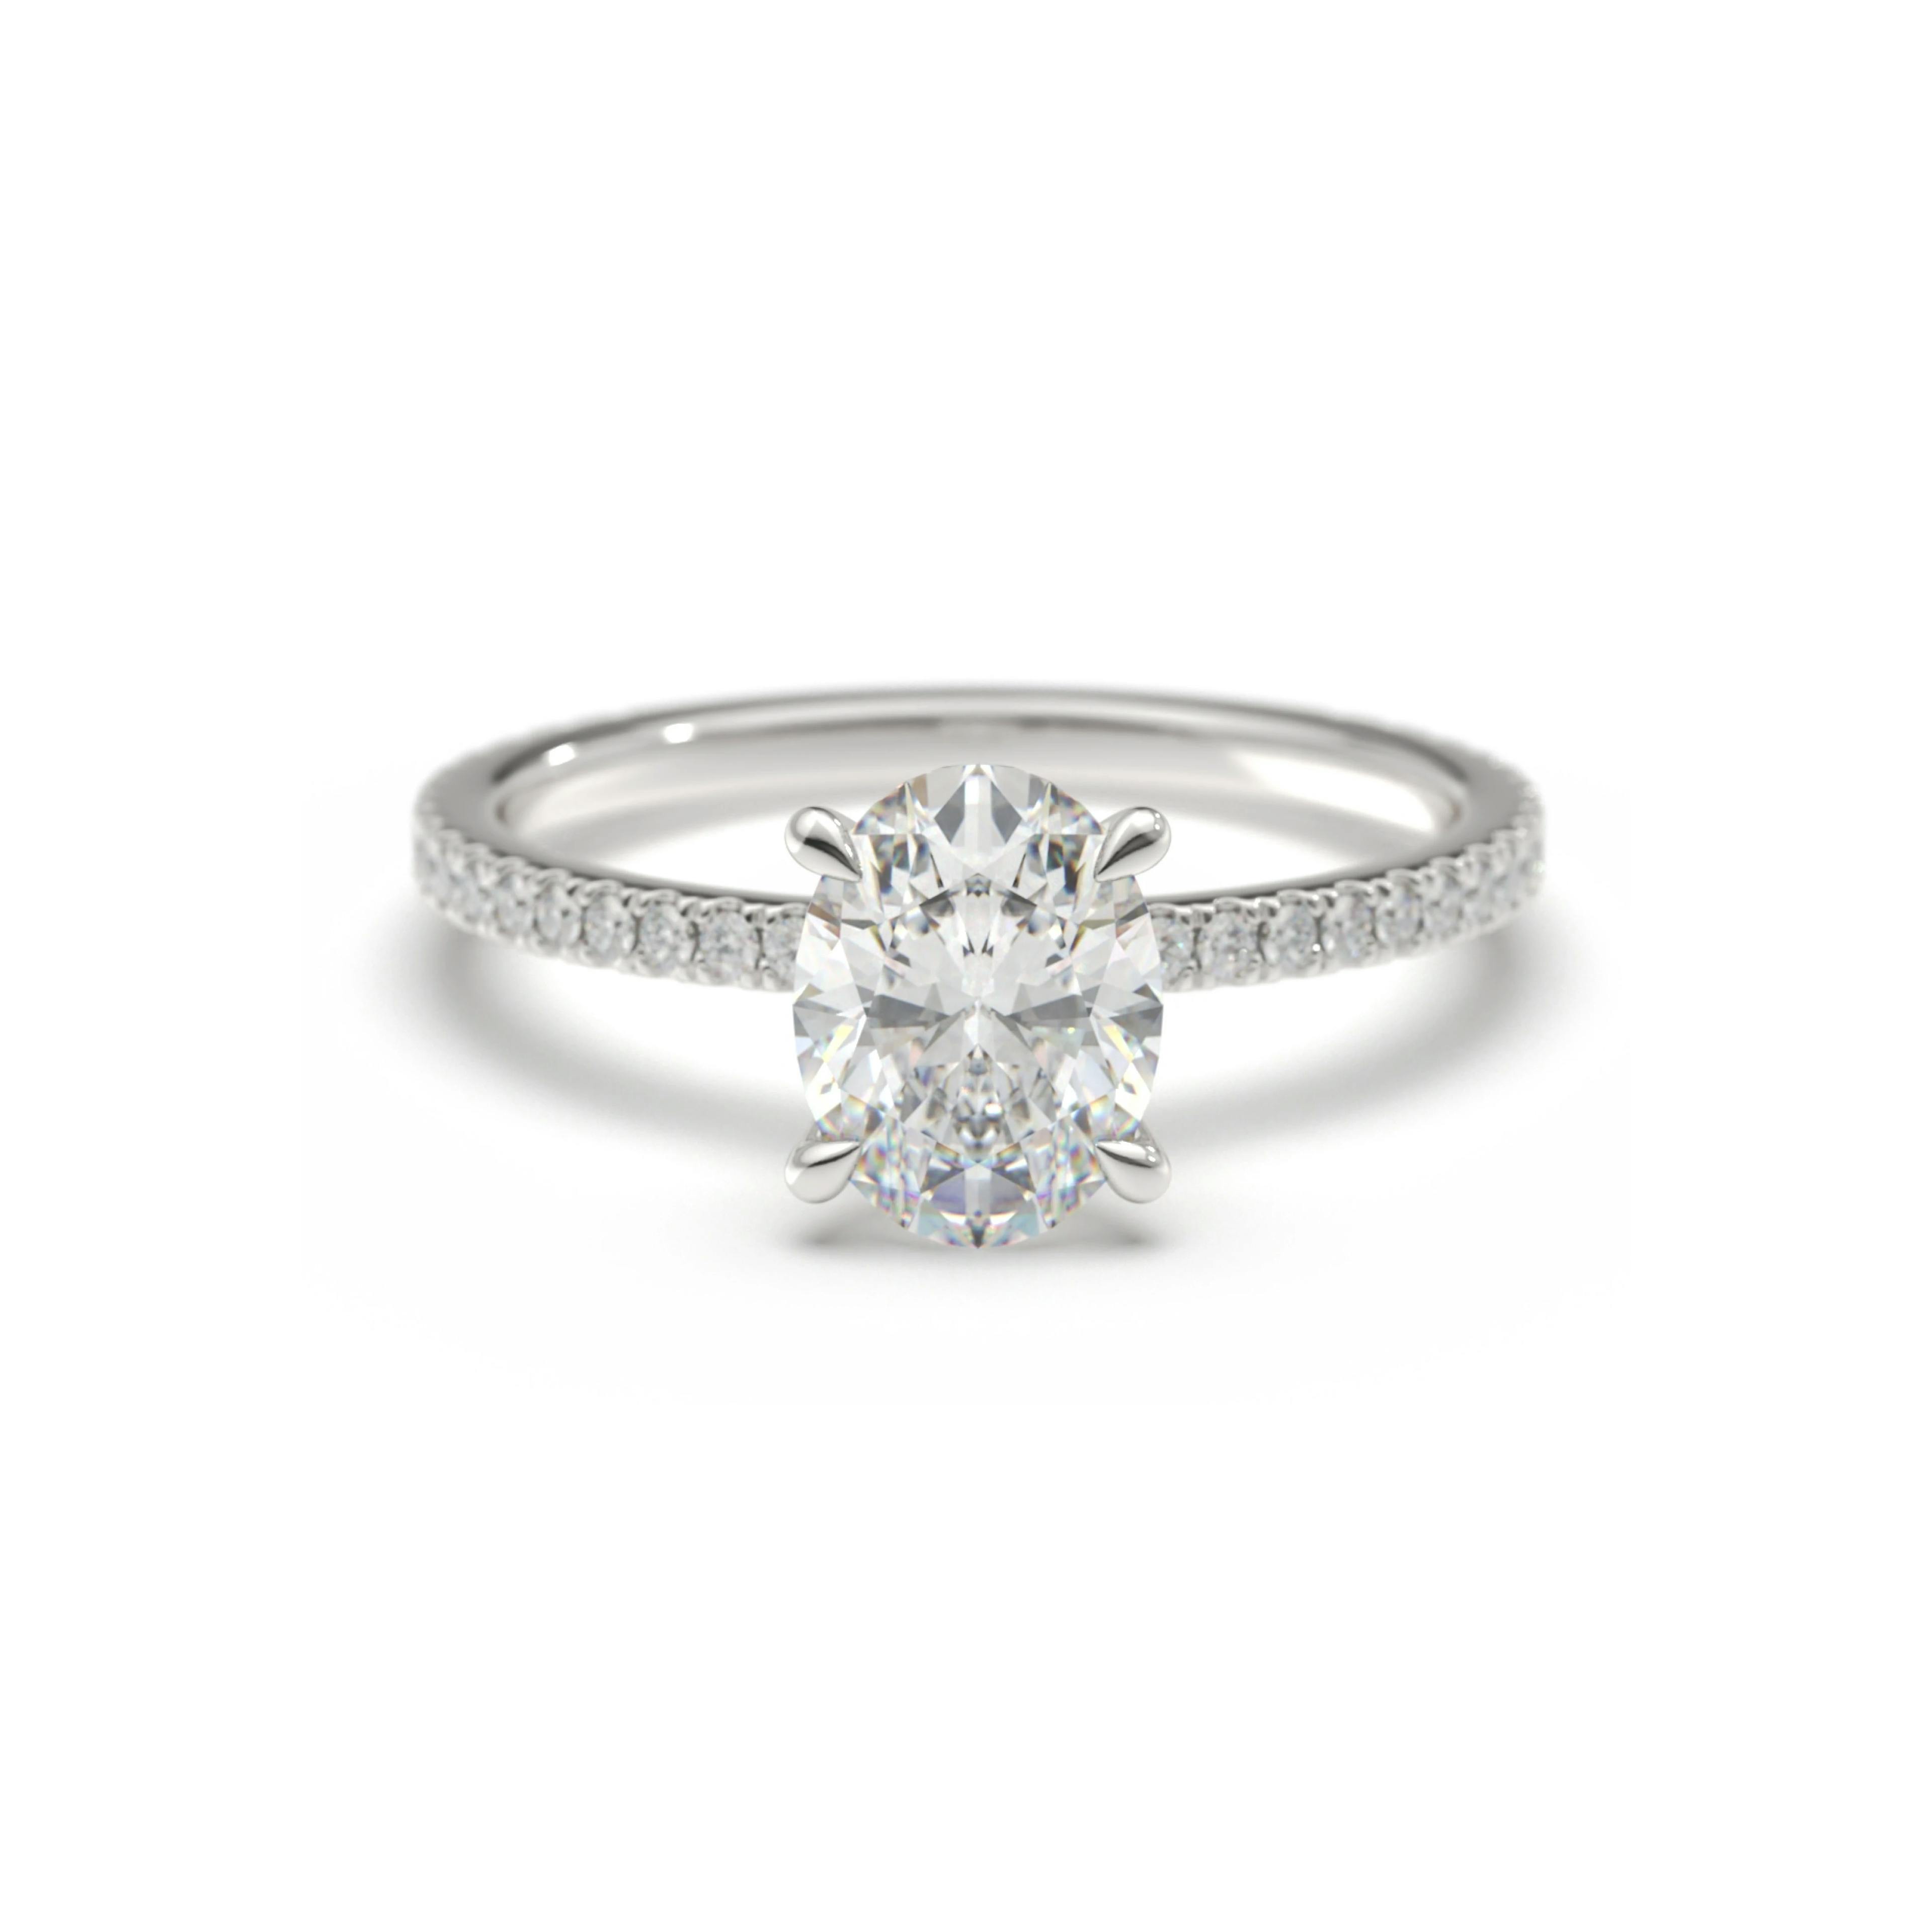 Rendered image of a diamond solitaire ring with a shoudler diamonds in White Gold